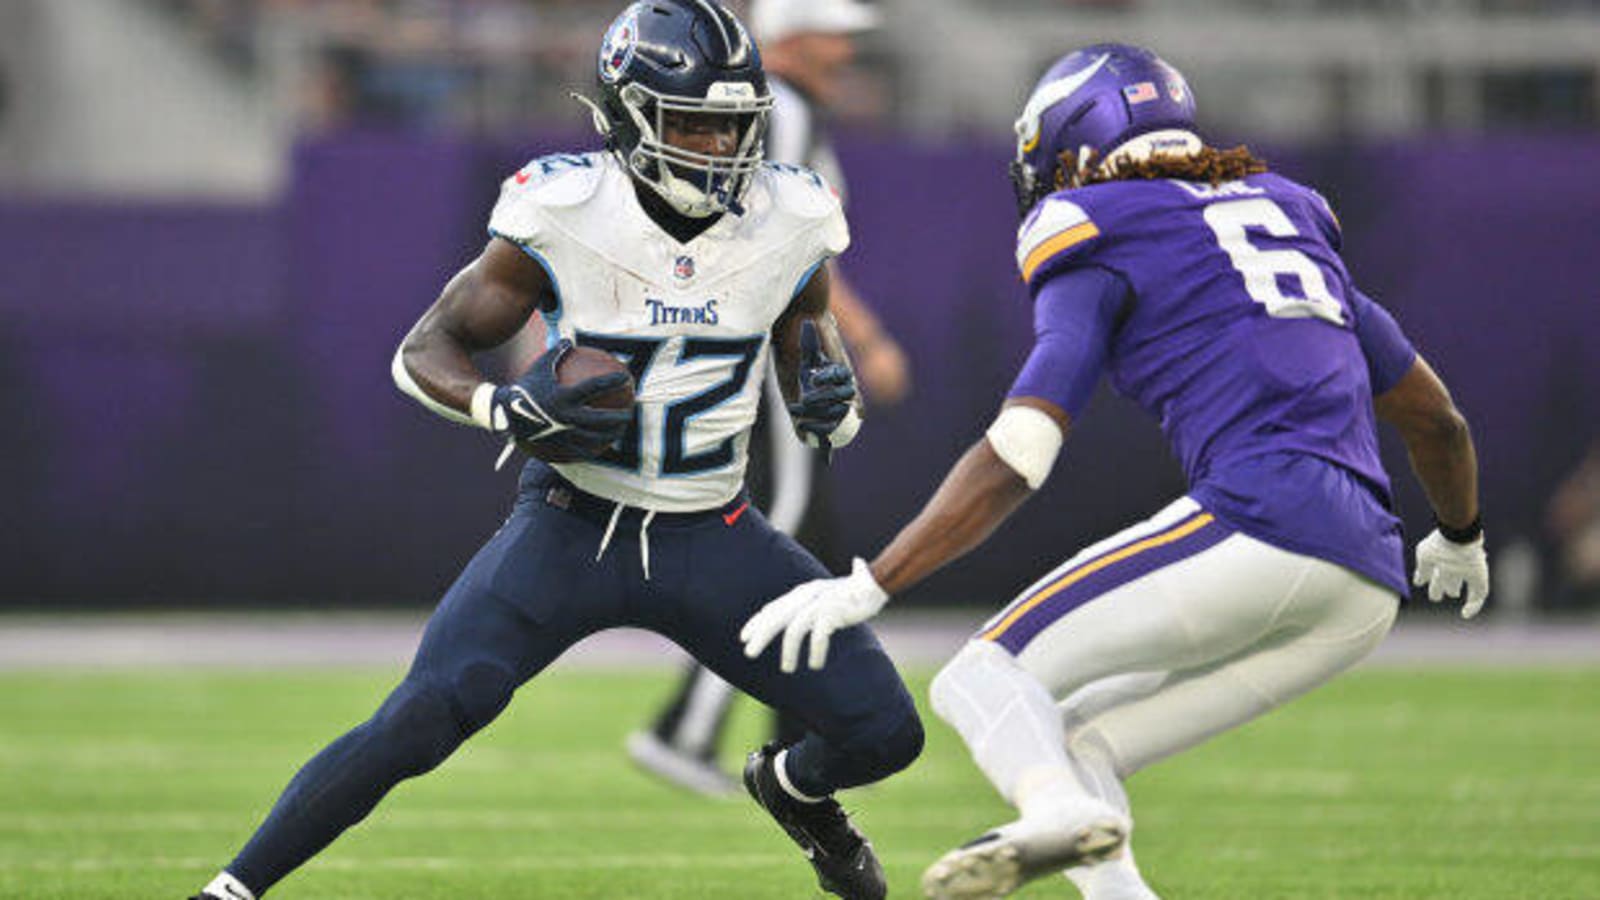 Takeaways from Vikings vs. Titans: Lewis Cine, Jaren Hall show flashes